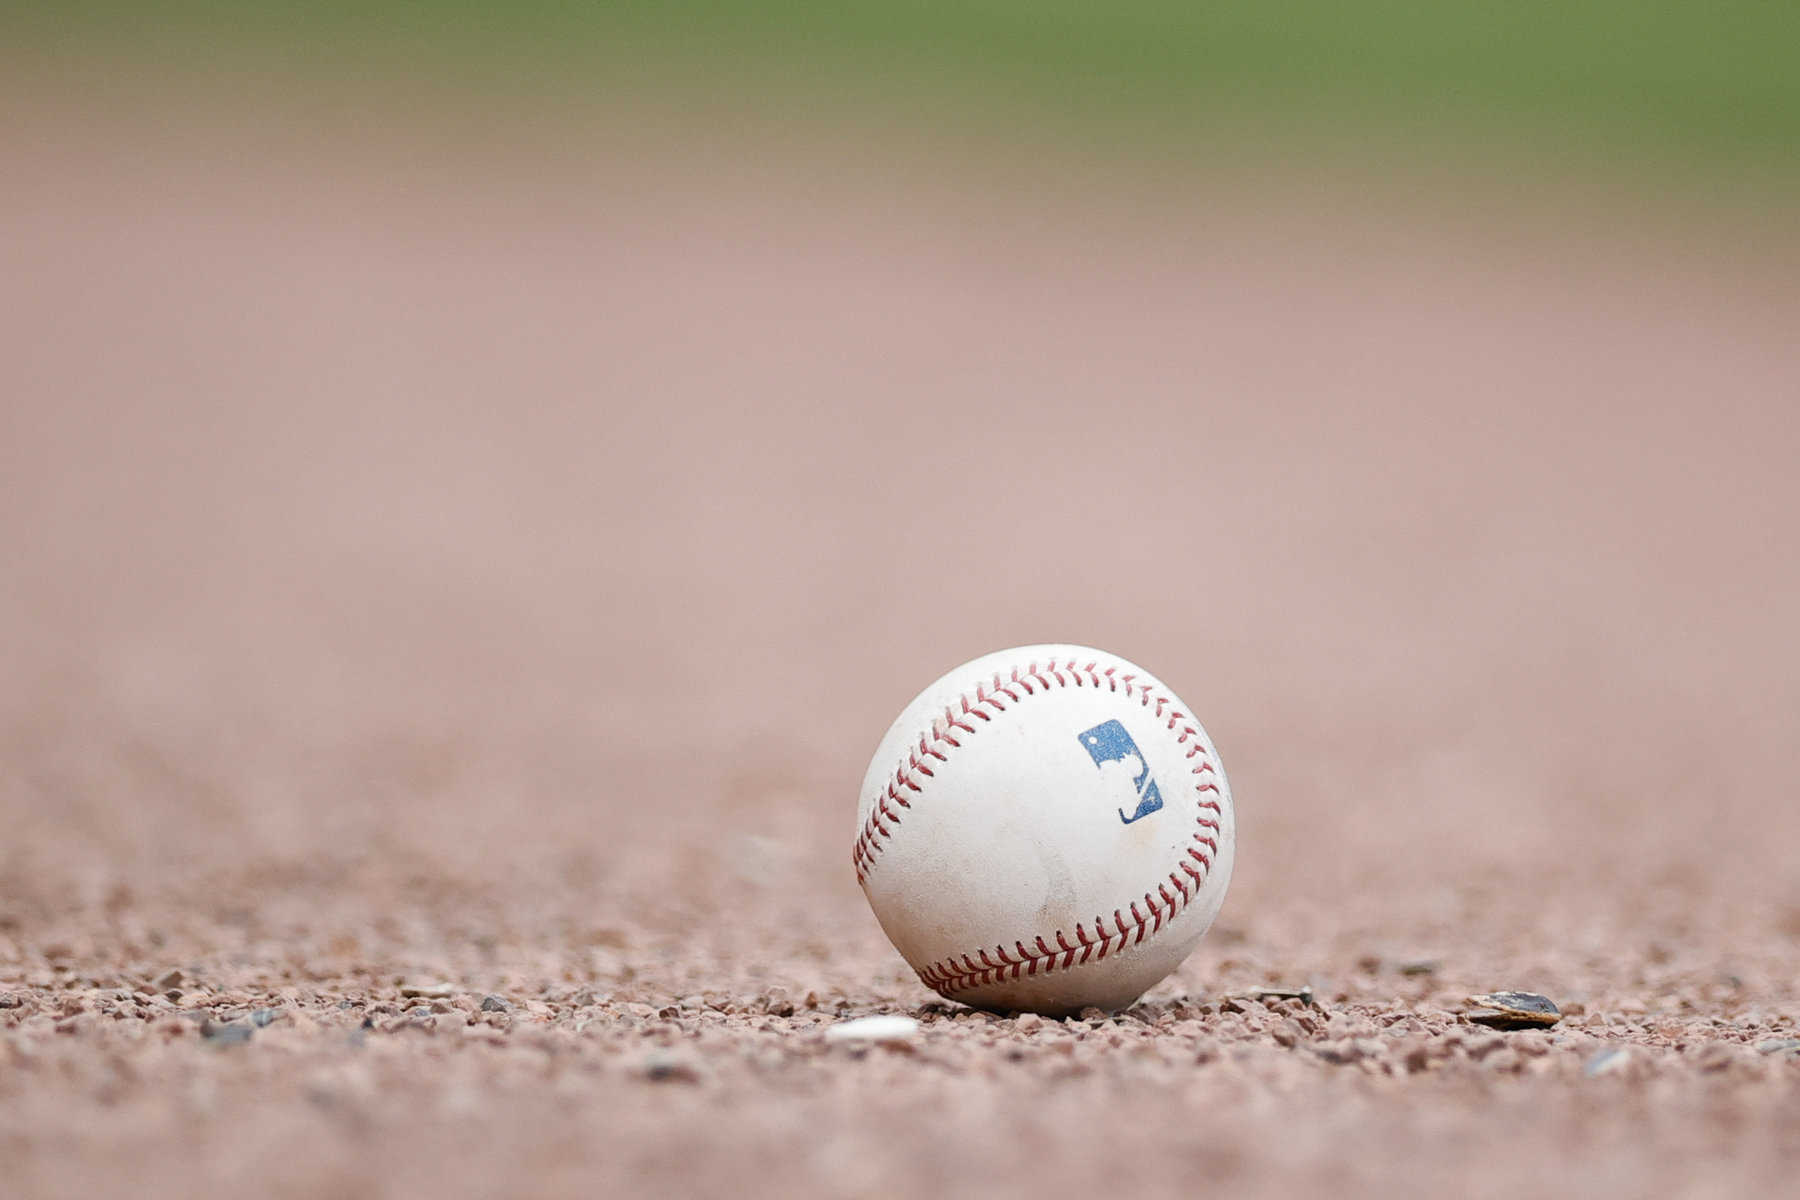 MLB DFS Punt Plays For DraftKings and FanDuel (May 7)